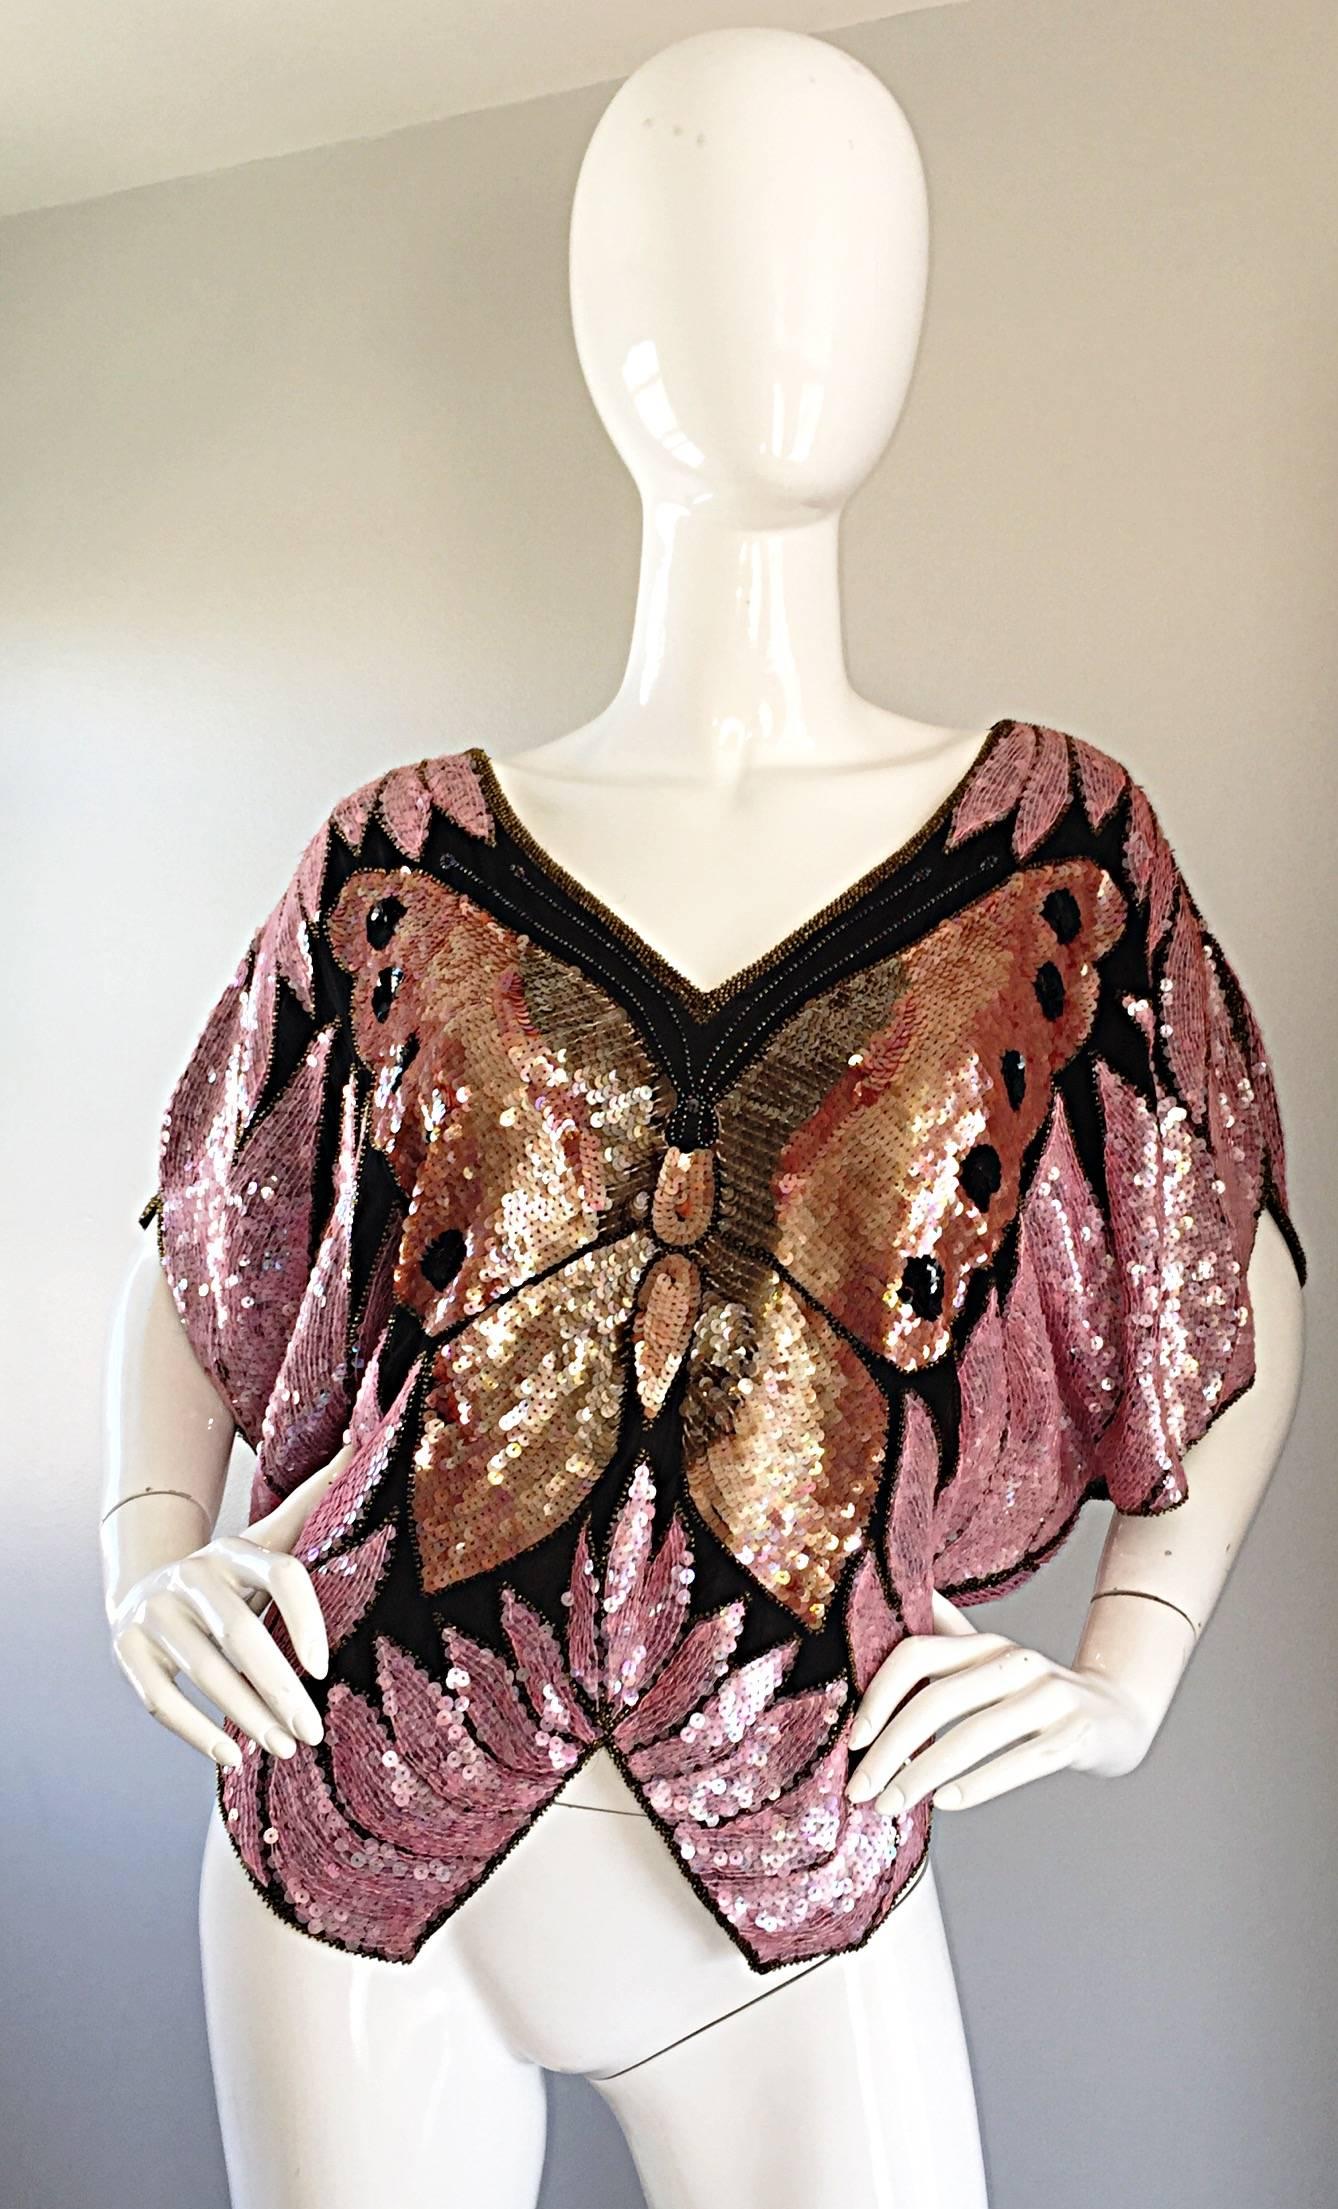 Amazing fully sequin and beaded 70s SWEELO butterfly disco dolman sleeve silk blouse! Fully hand-sewn and beaded, with gold and pink sequins that form a butterfly on the front and back. Chic dolman sleeves make this gem easy to fit most sizes. Hangs